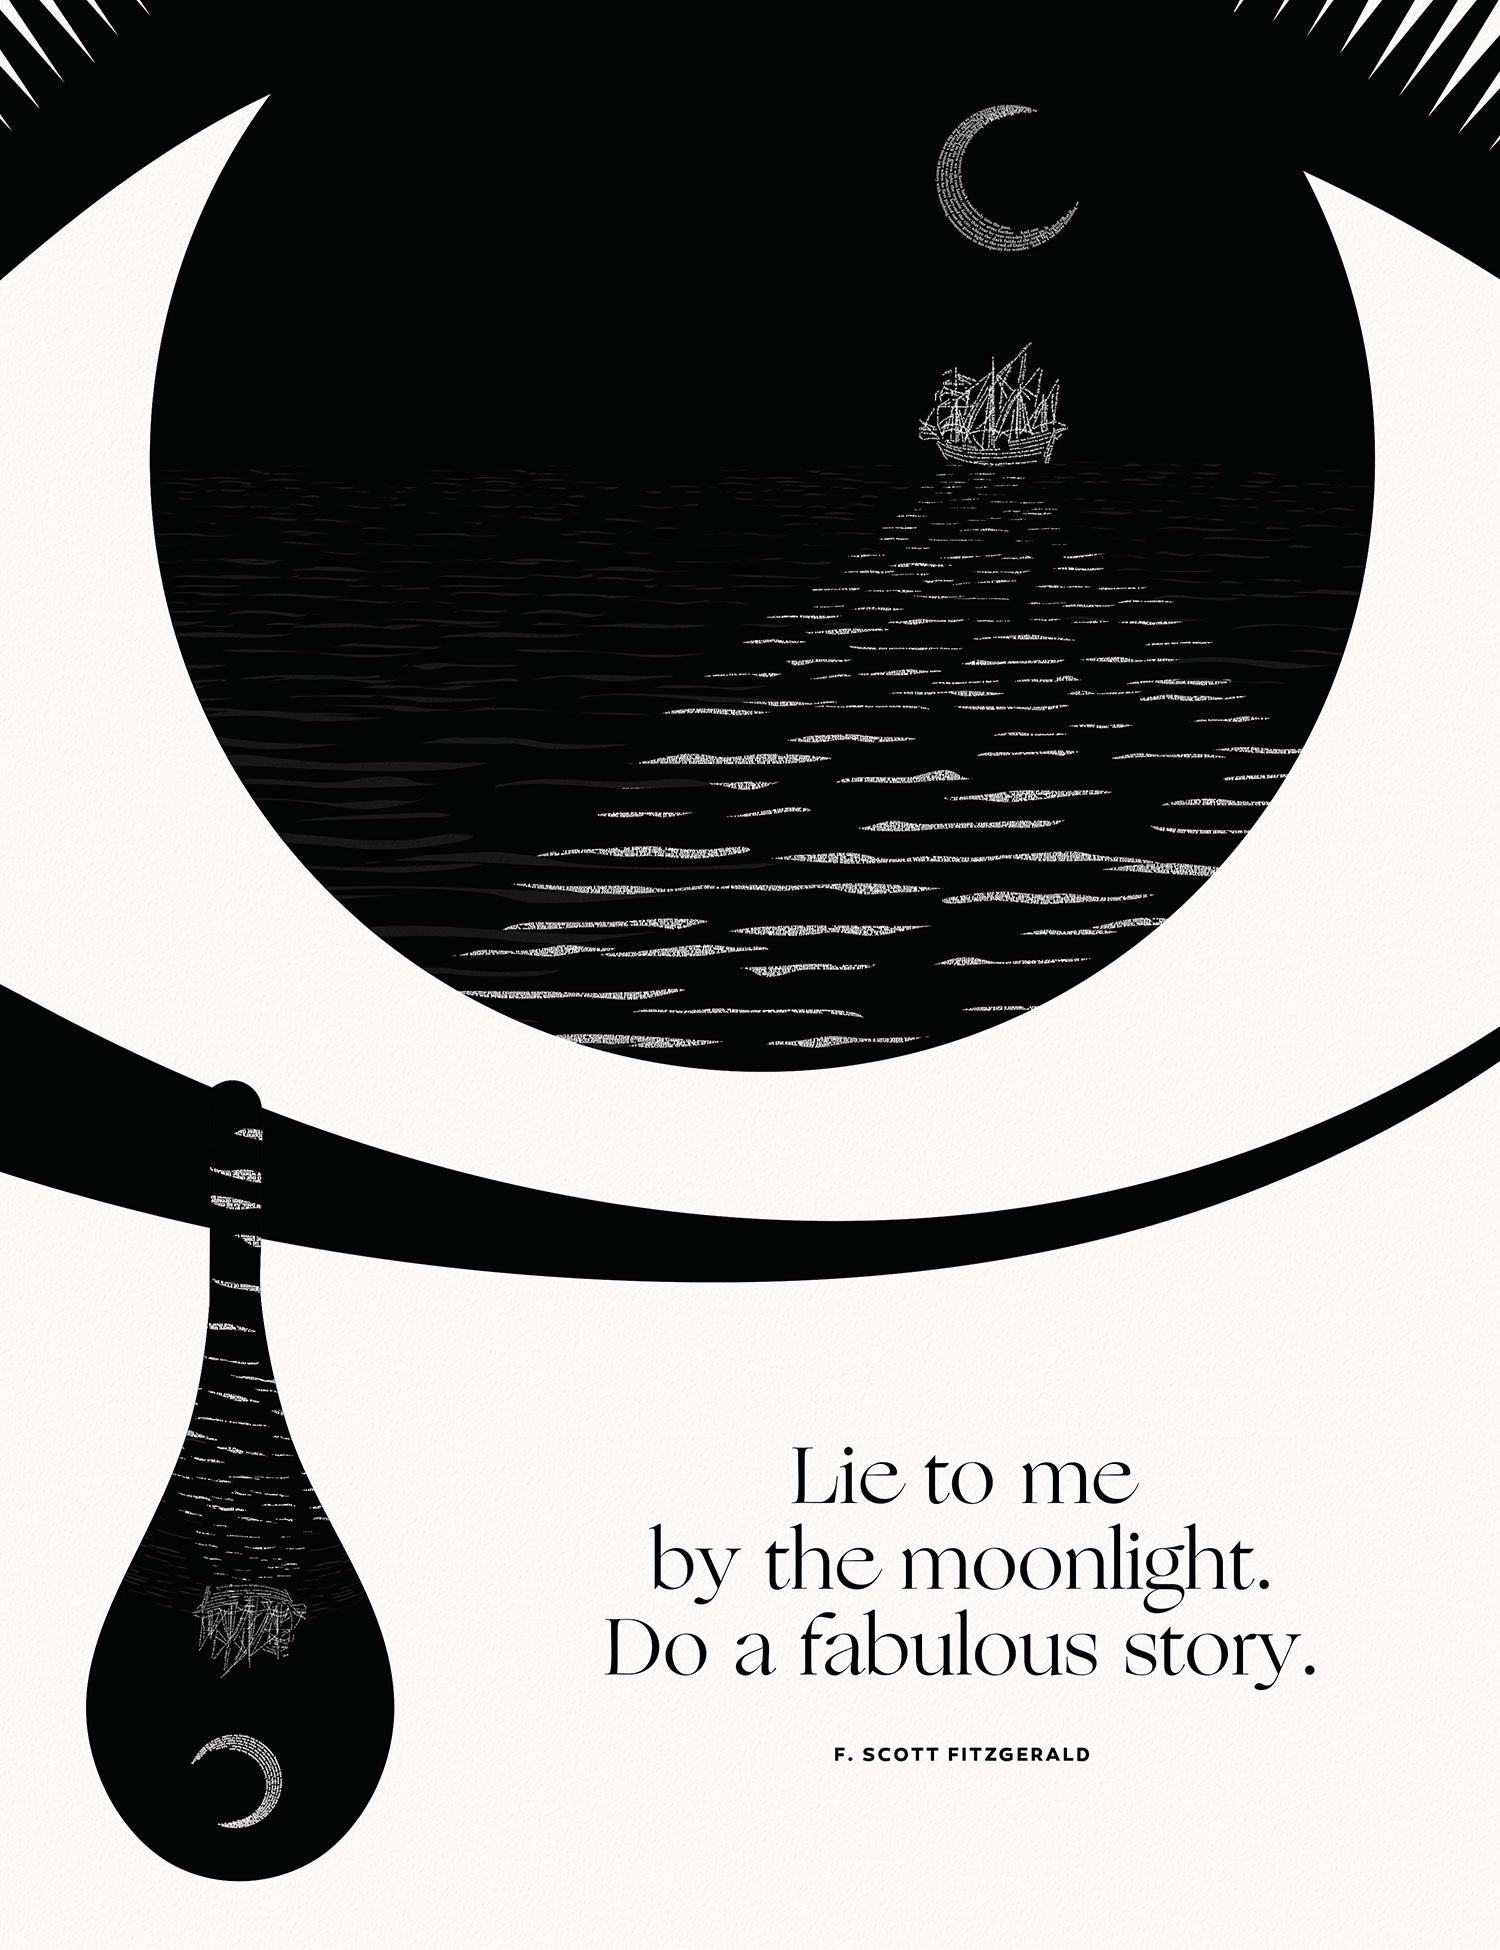 F. Scott Fitzgerald Lie to me by the moonlight do a fabulous story. Illustration by Obvious State